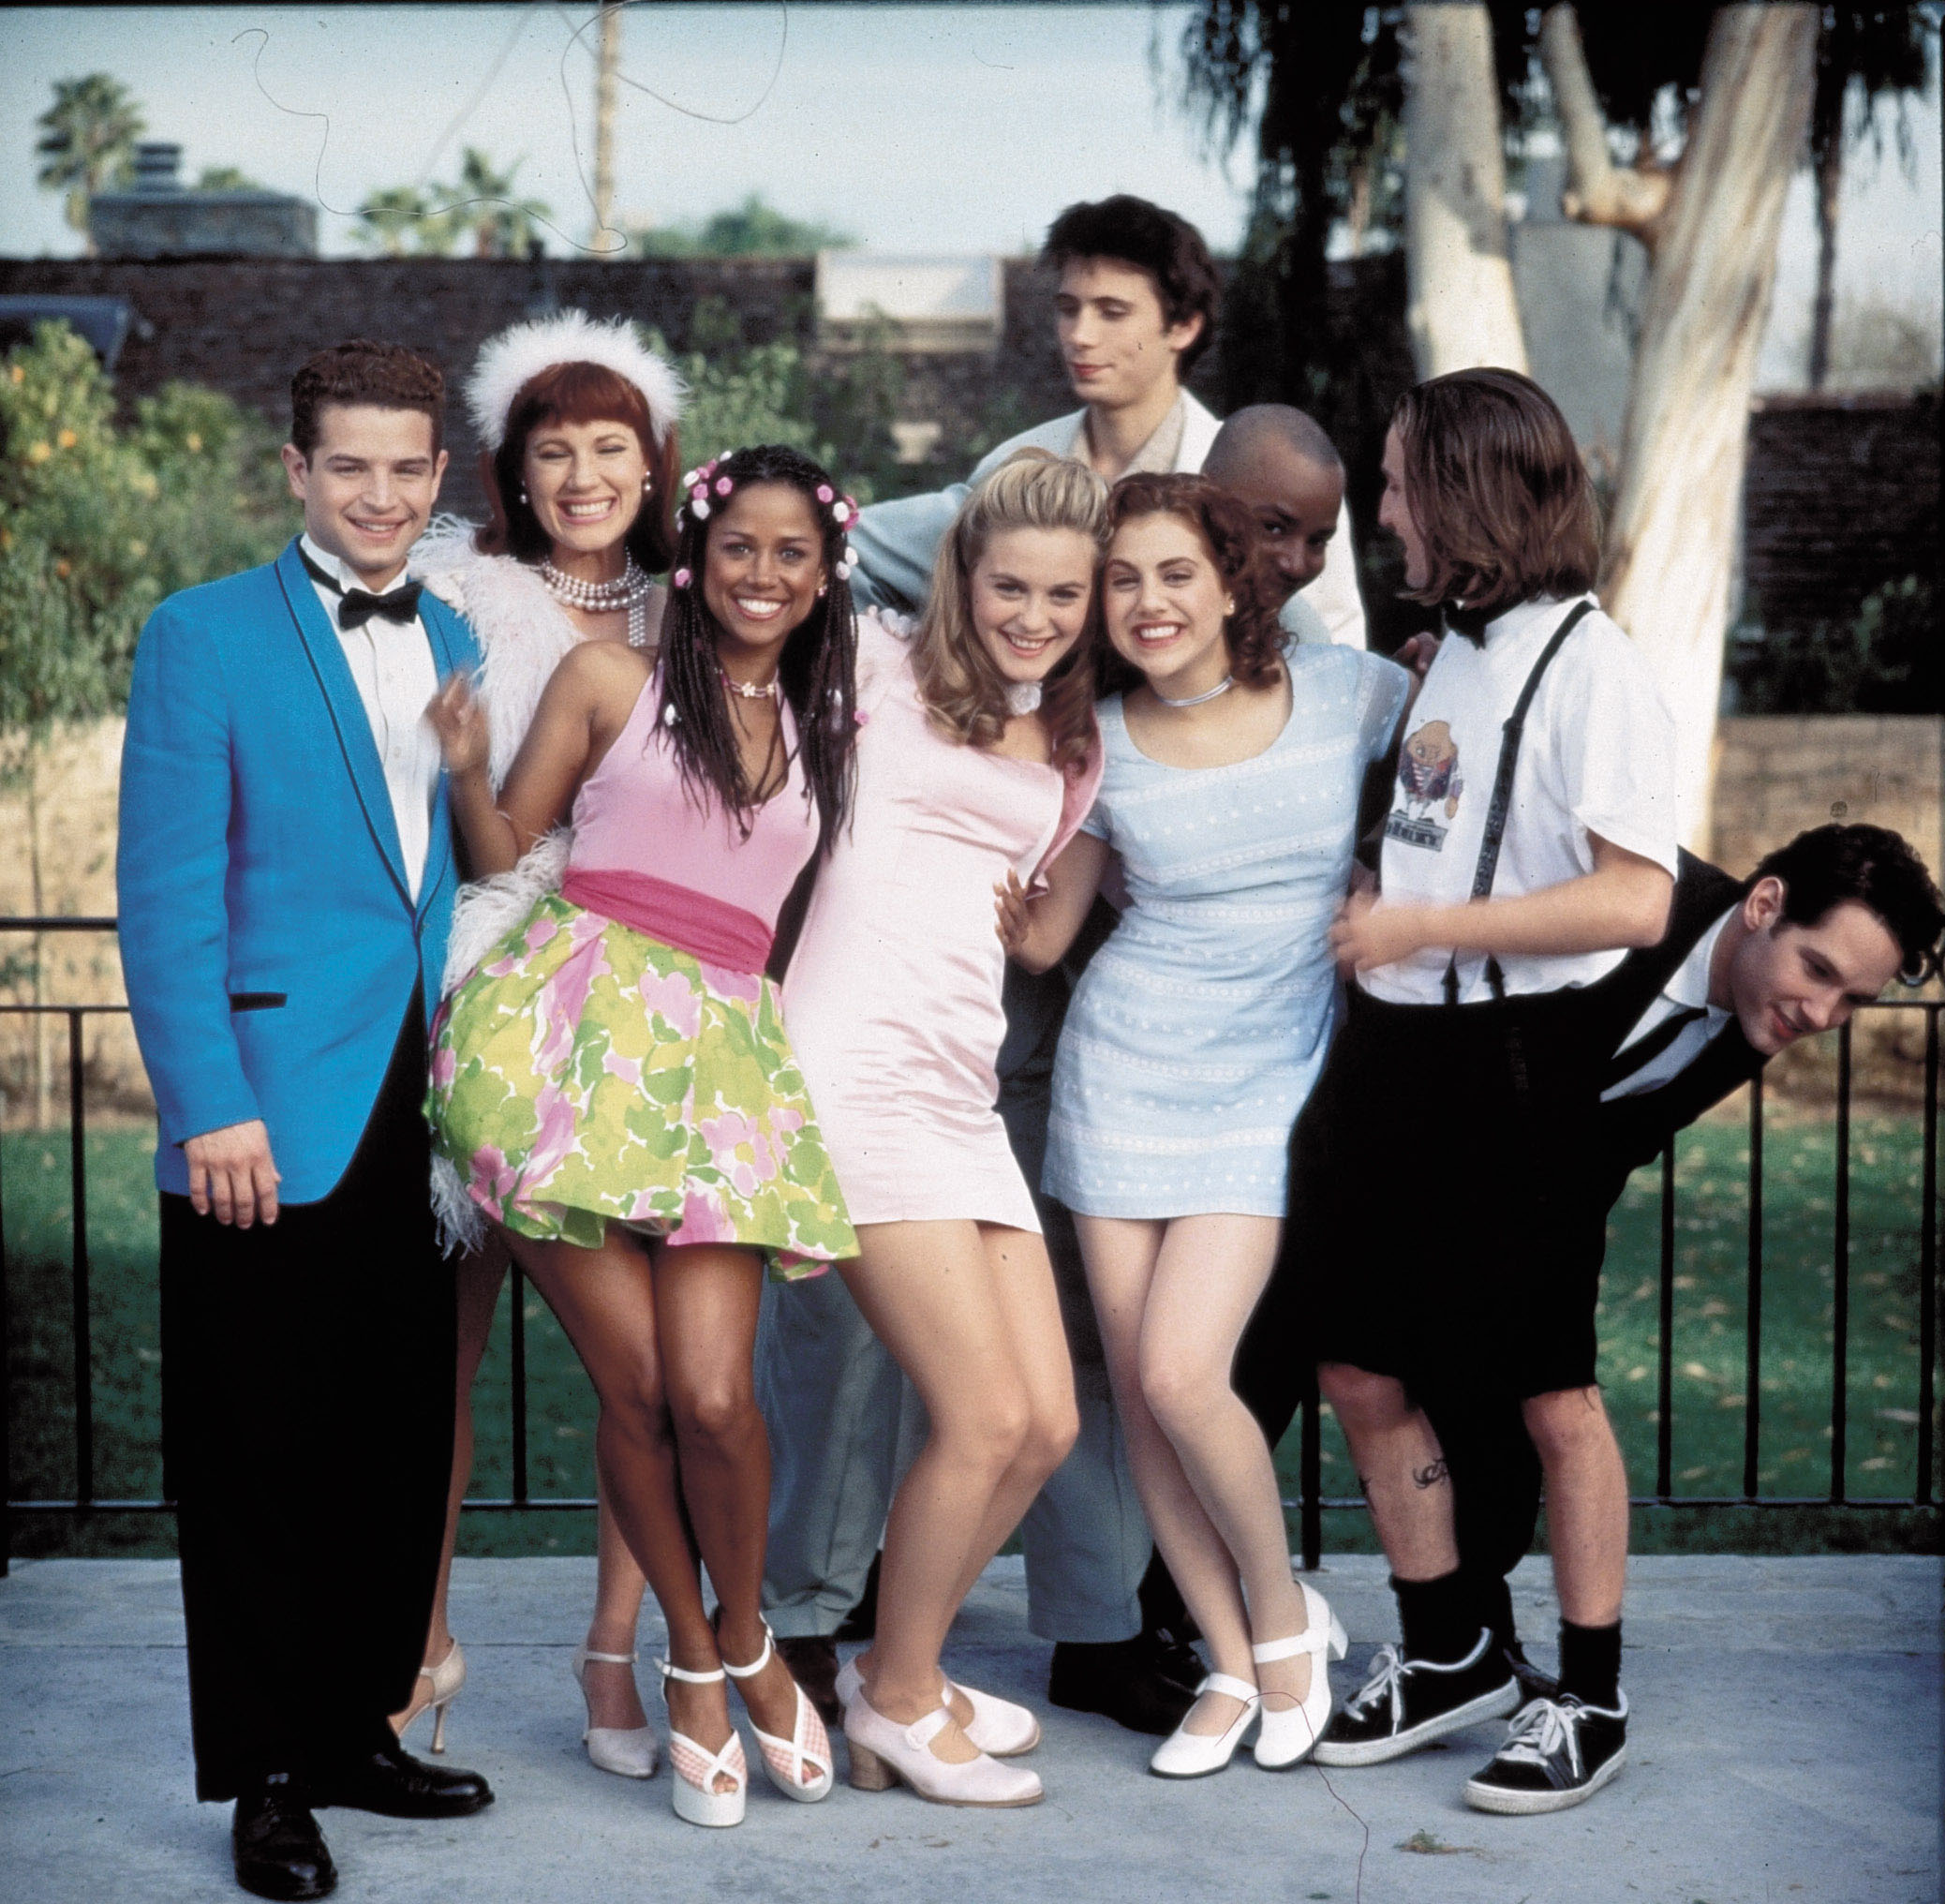 PHOTO: The cast of the 1995 film "Clueless" is pictured in a promotional image.